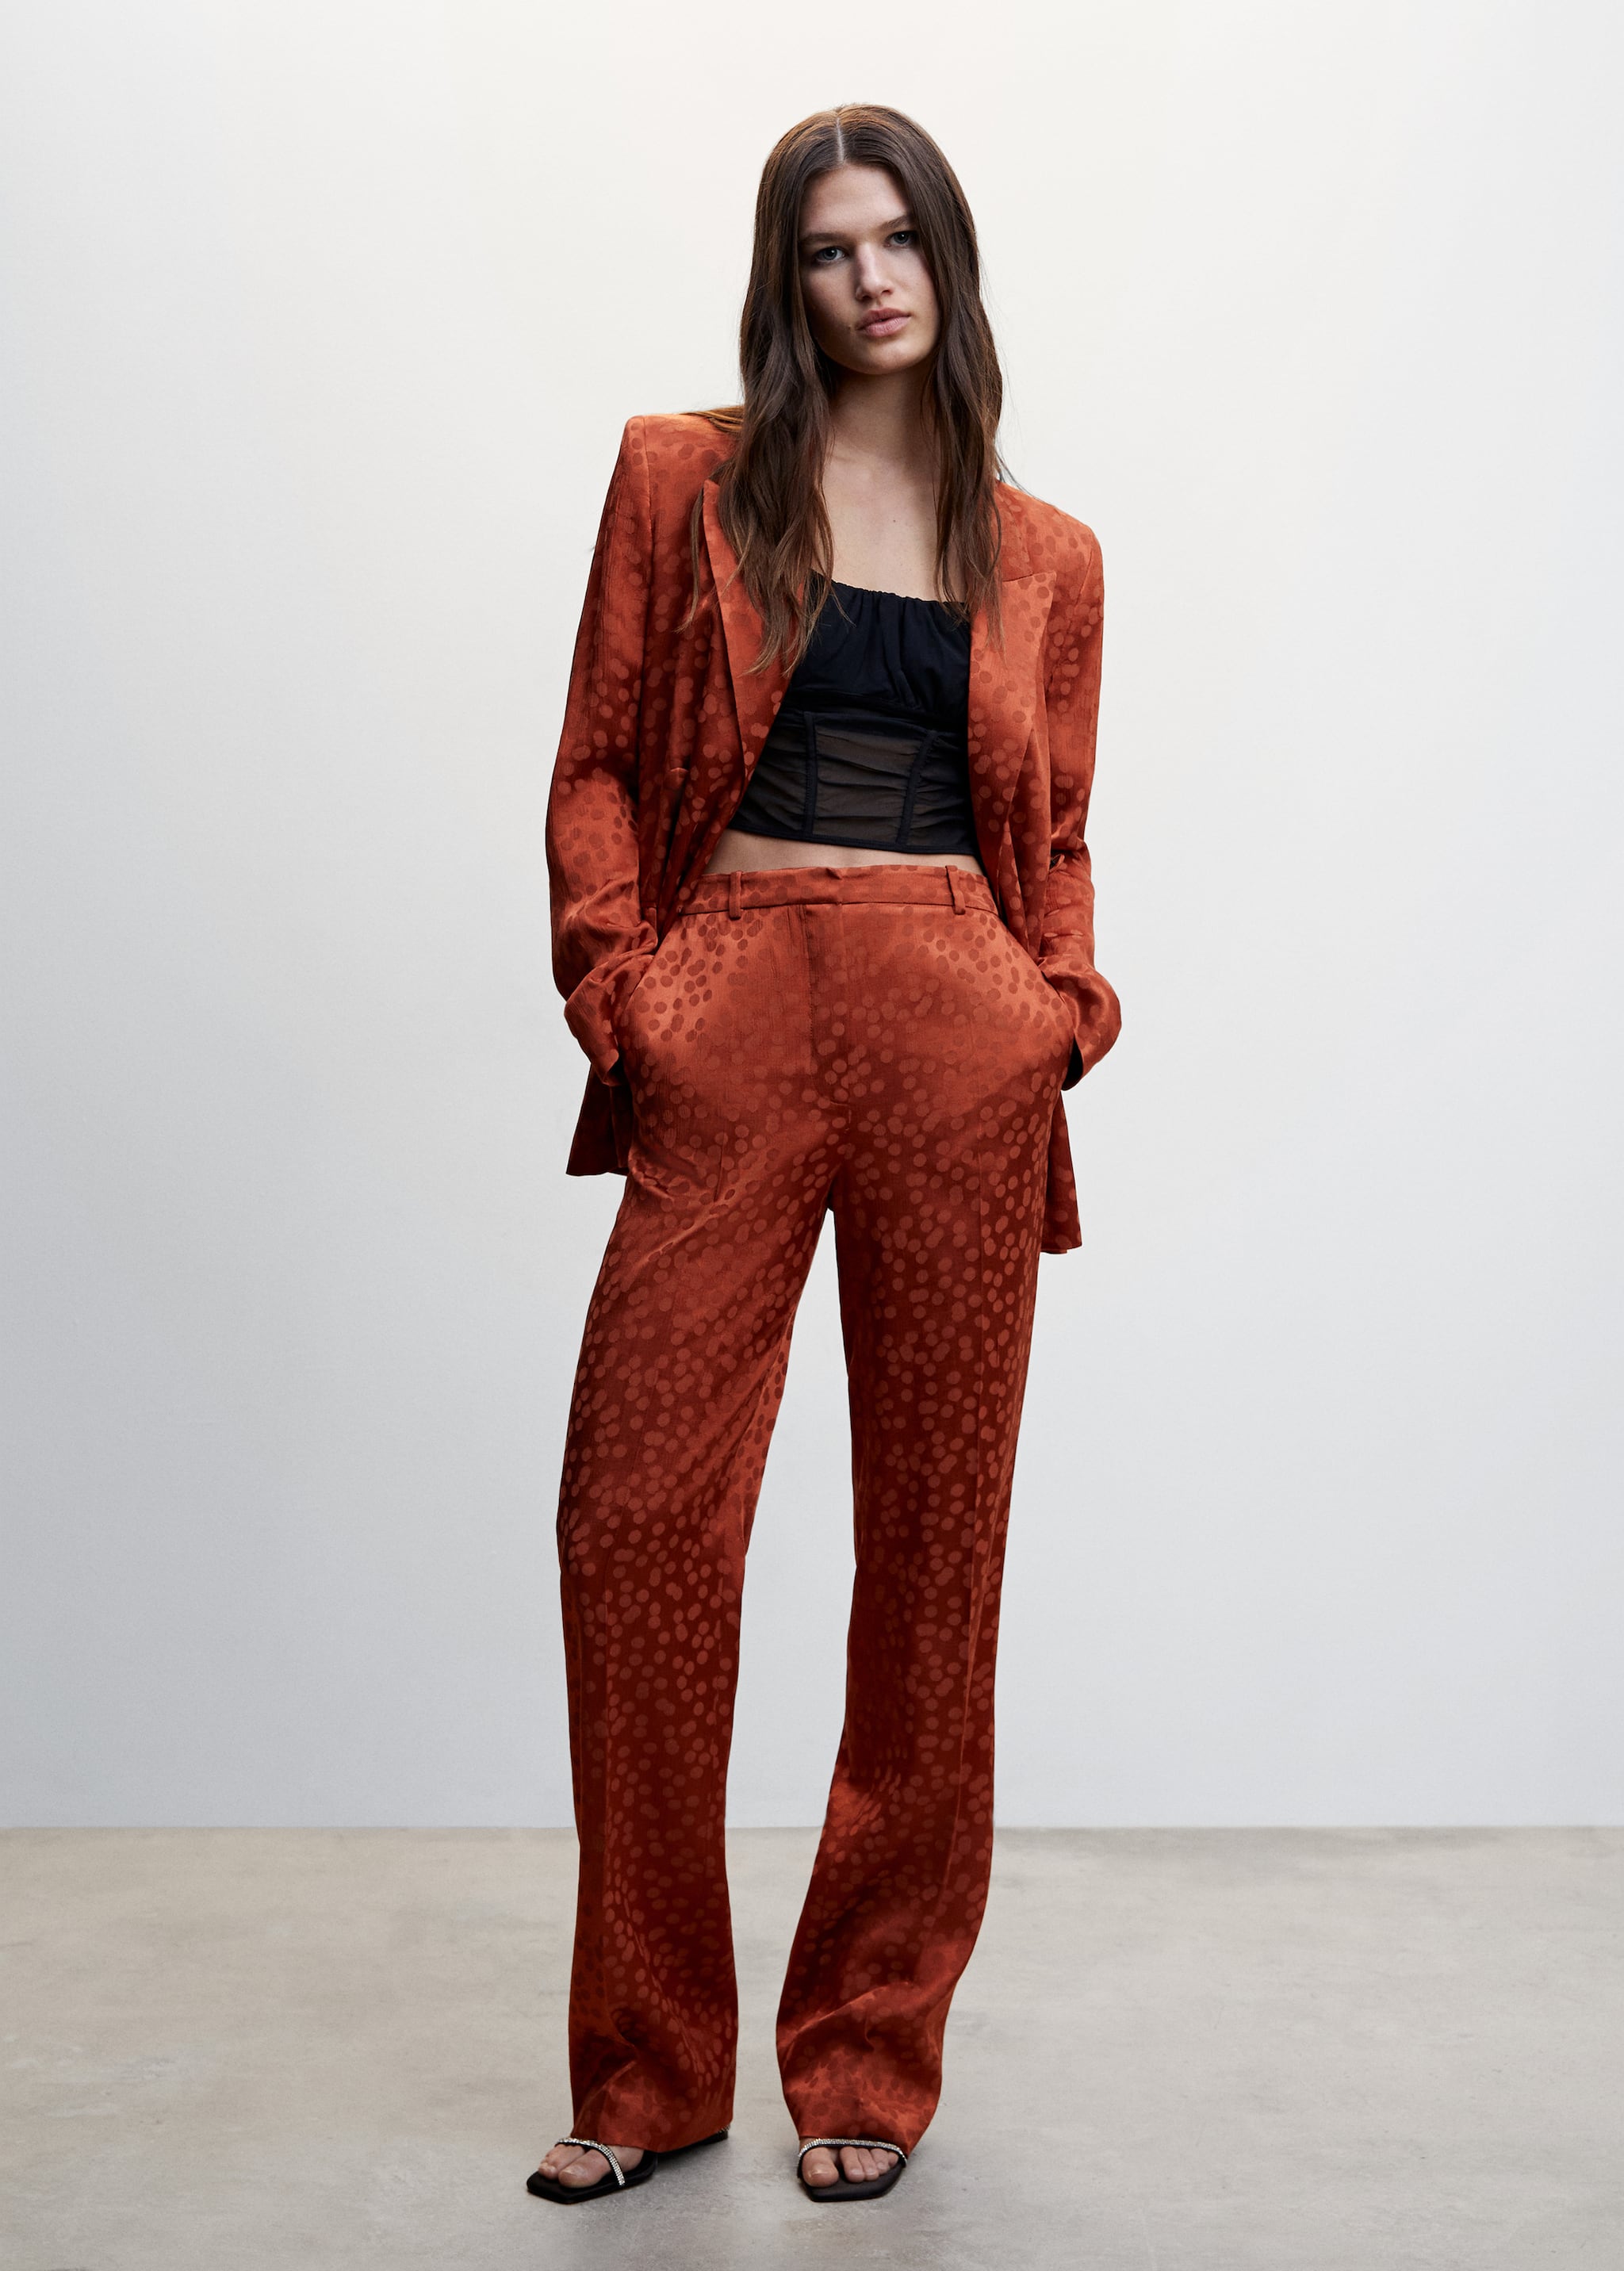 Satin trousers with polka dots - General plane